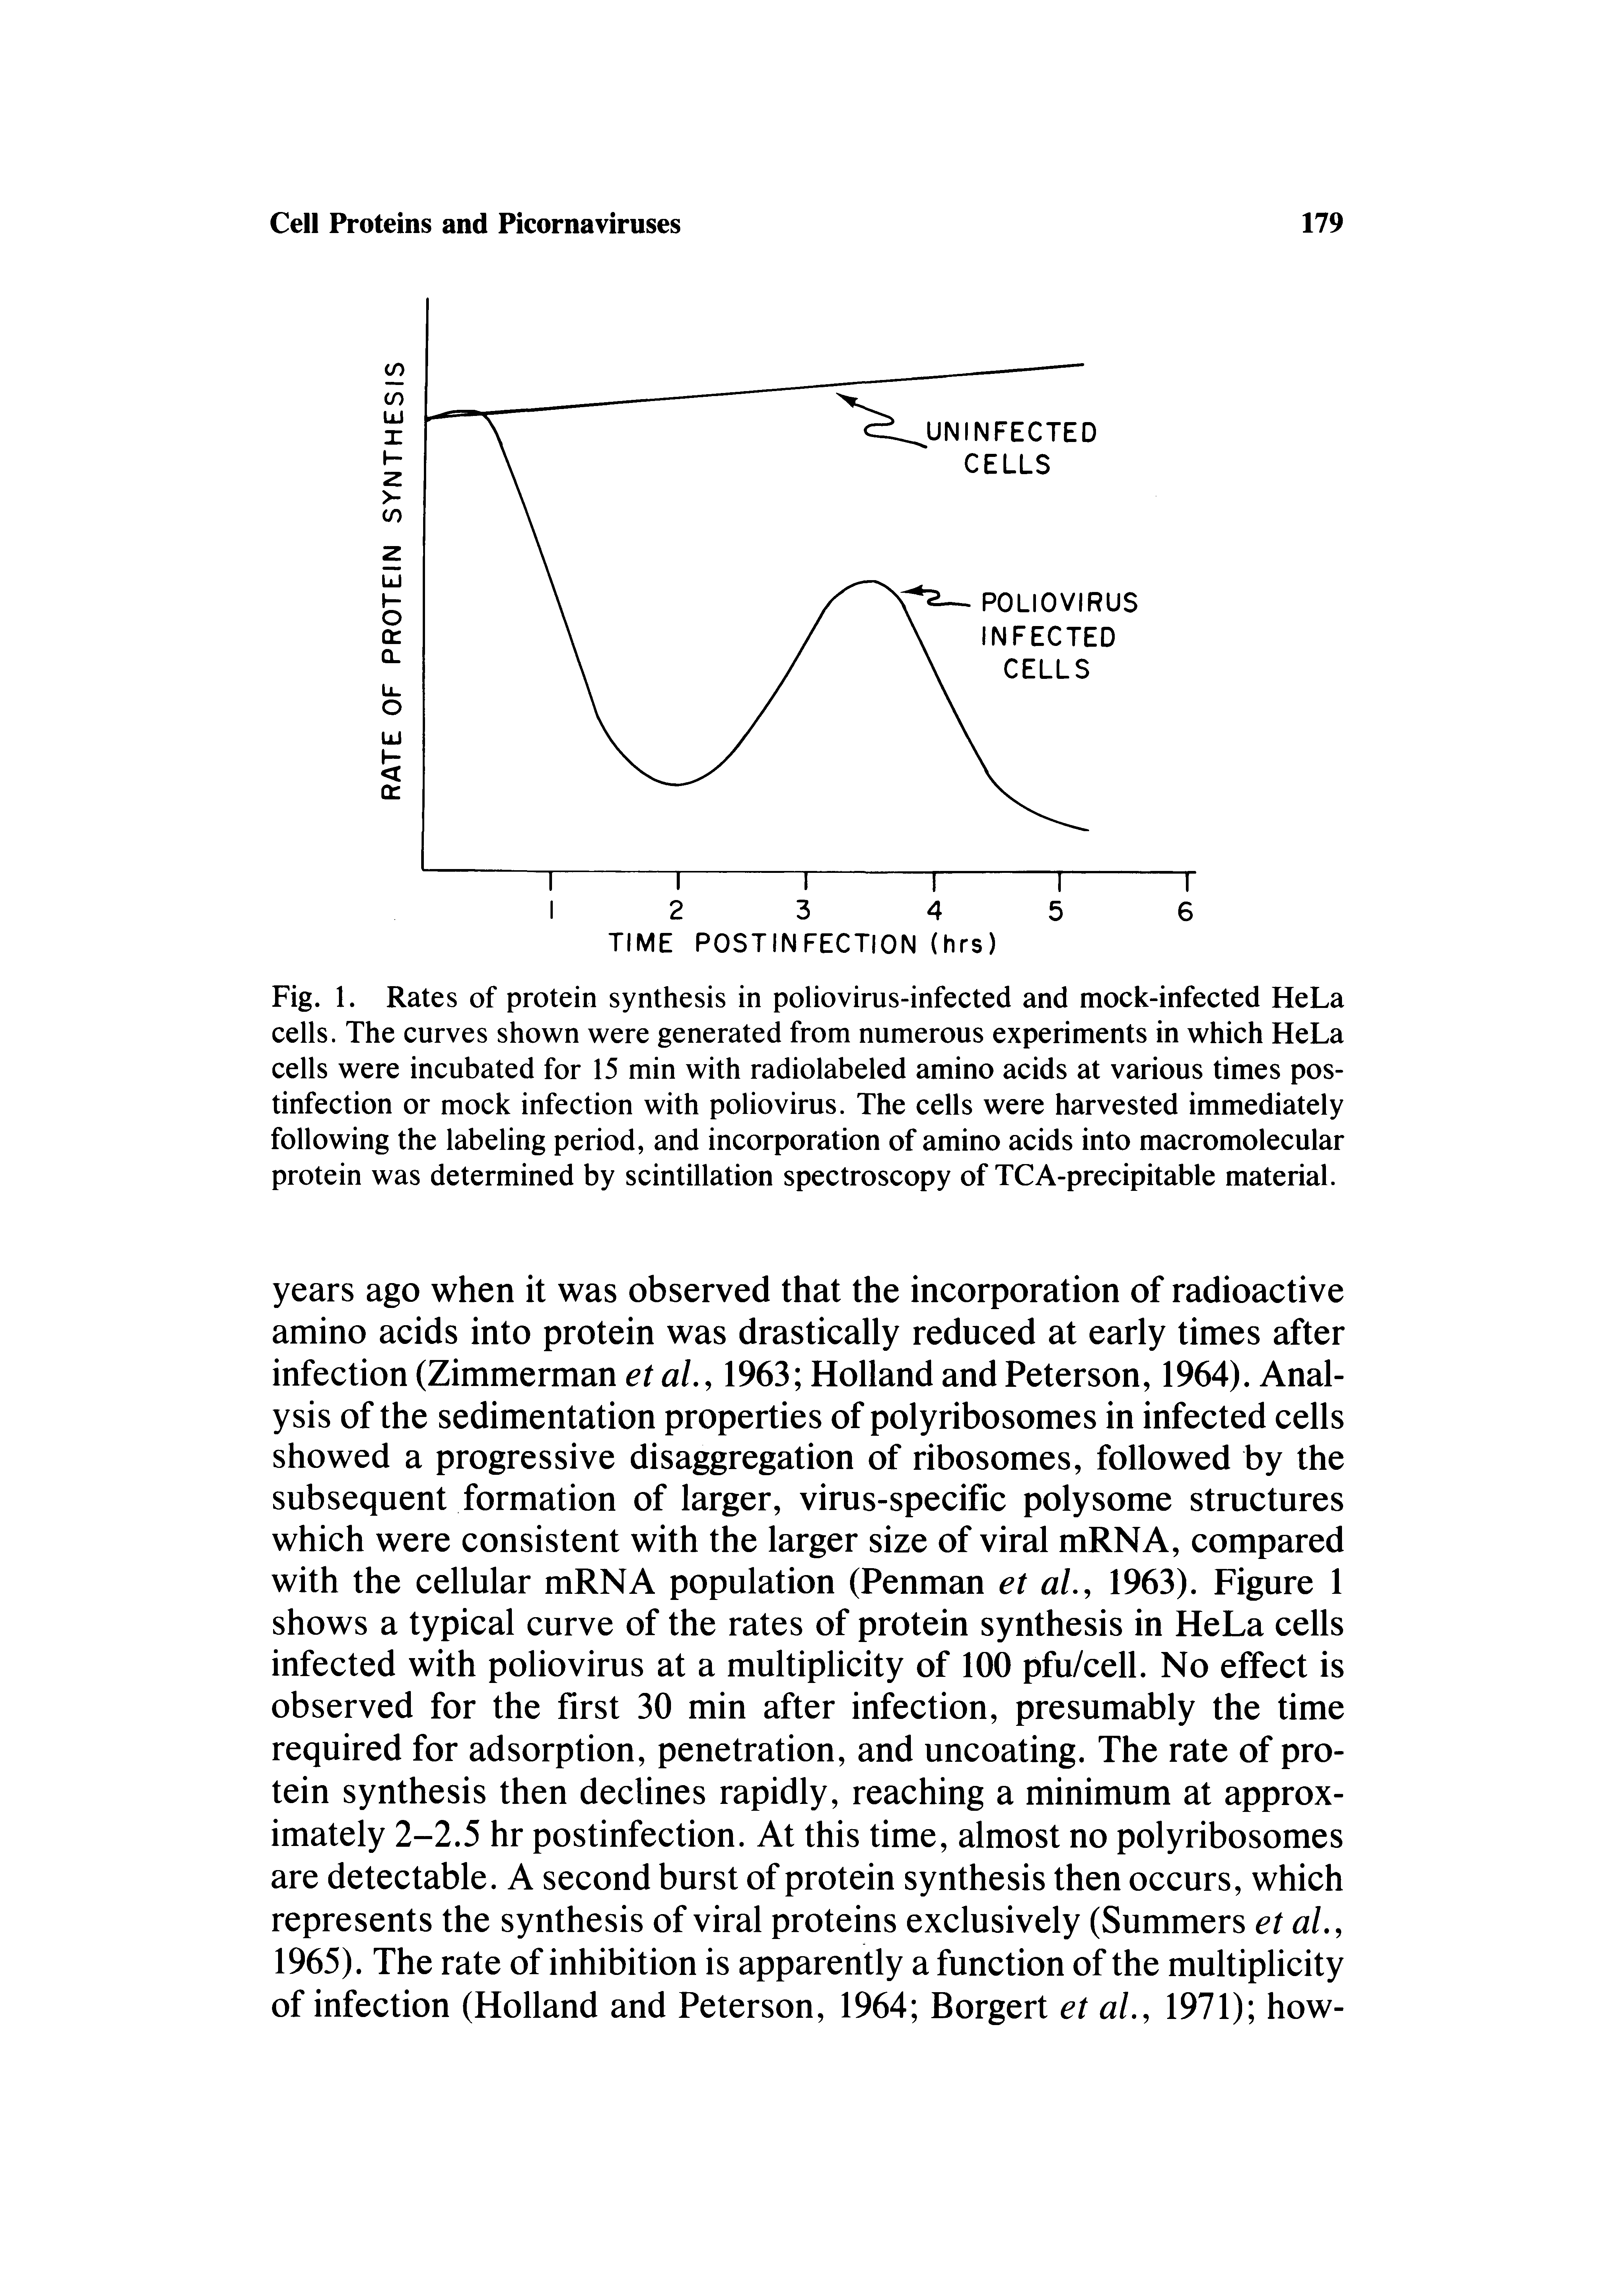 Fig. 1. Rates of protein synthesis in poliovirus-infected and mock-infected HeLa cells. The curves shown were generated from numerous experiments in which HeLa cells were incubated for 15 min with radiolabeled amino acids at various times postinfection or mock infection with poliovirus. The cells were harvested immediately following the labeling period, and incorporation of amino acids into macromolecular protein was determined by scintillation spectroscopy of TCA-precipitable material.